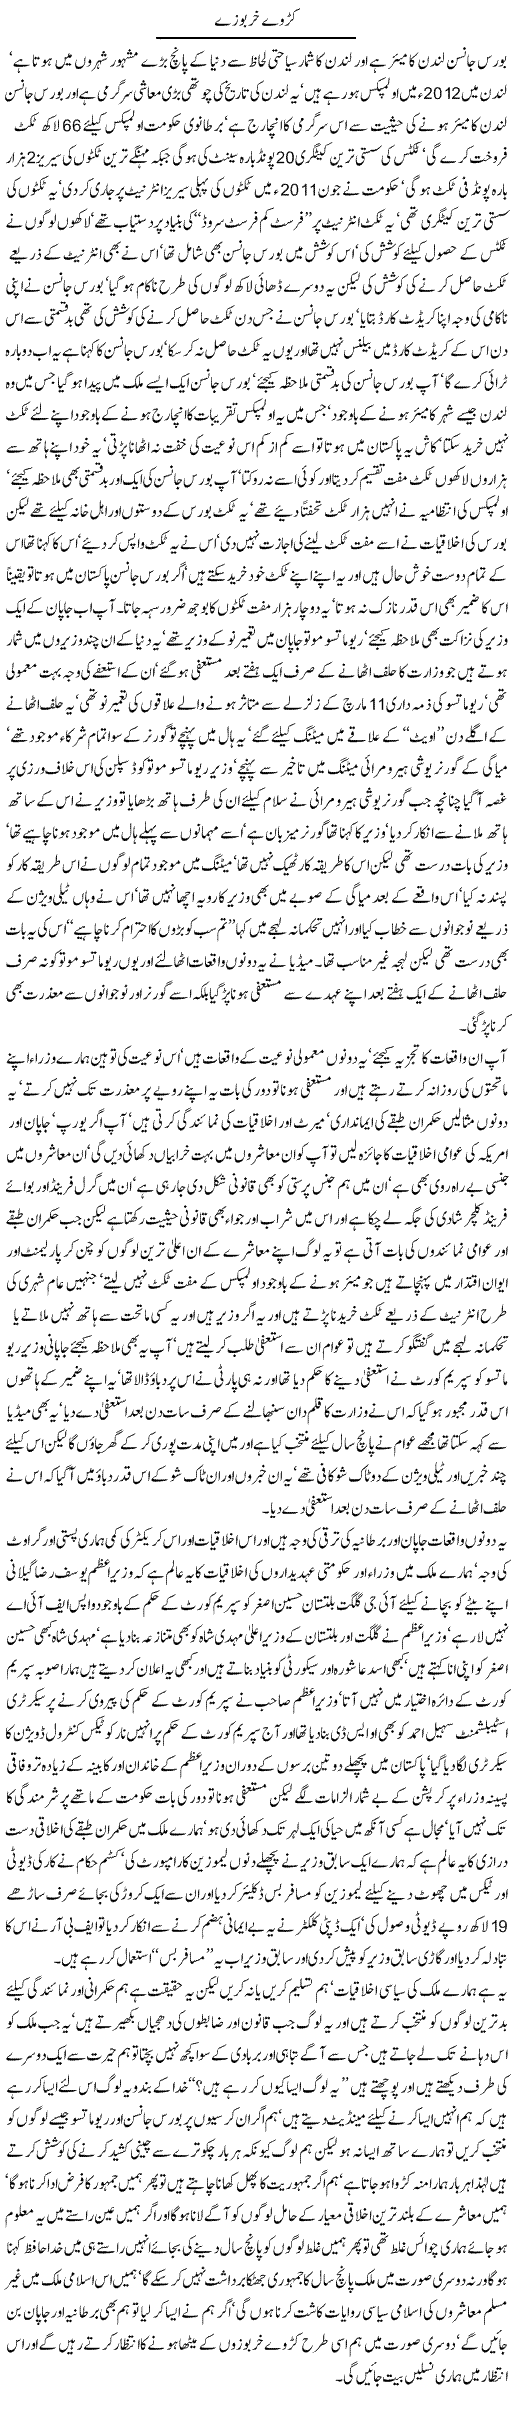 Honesty Express Column Javed Chaudhry 2 August 2011